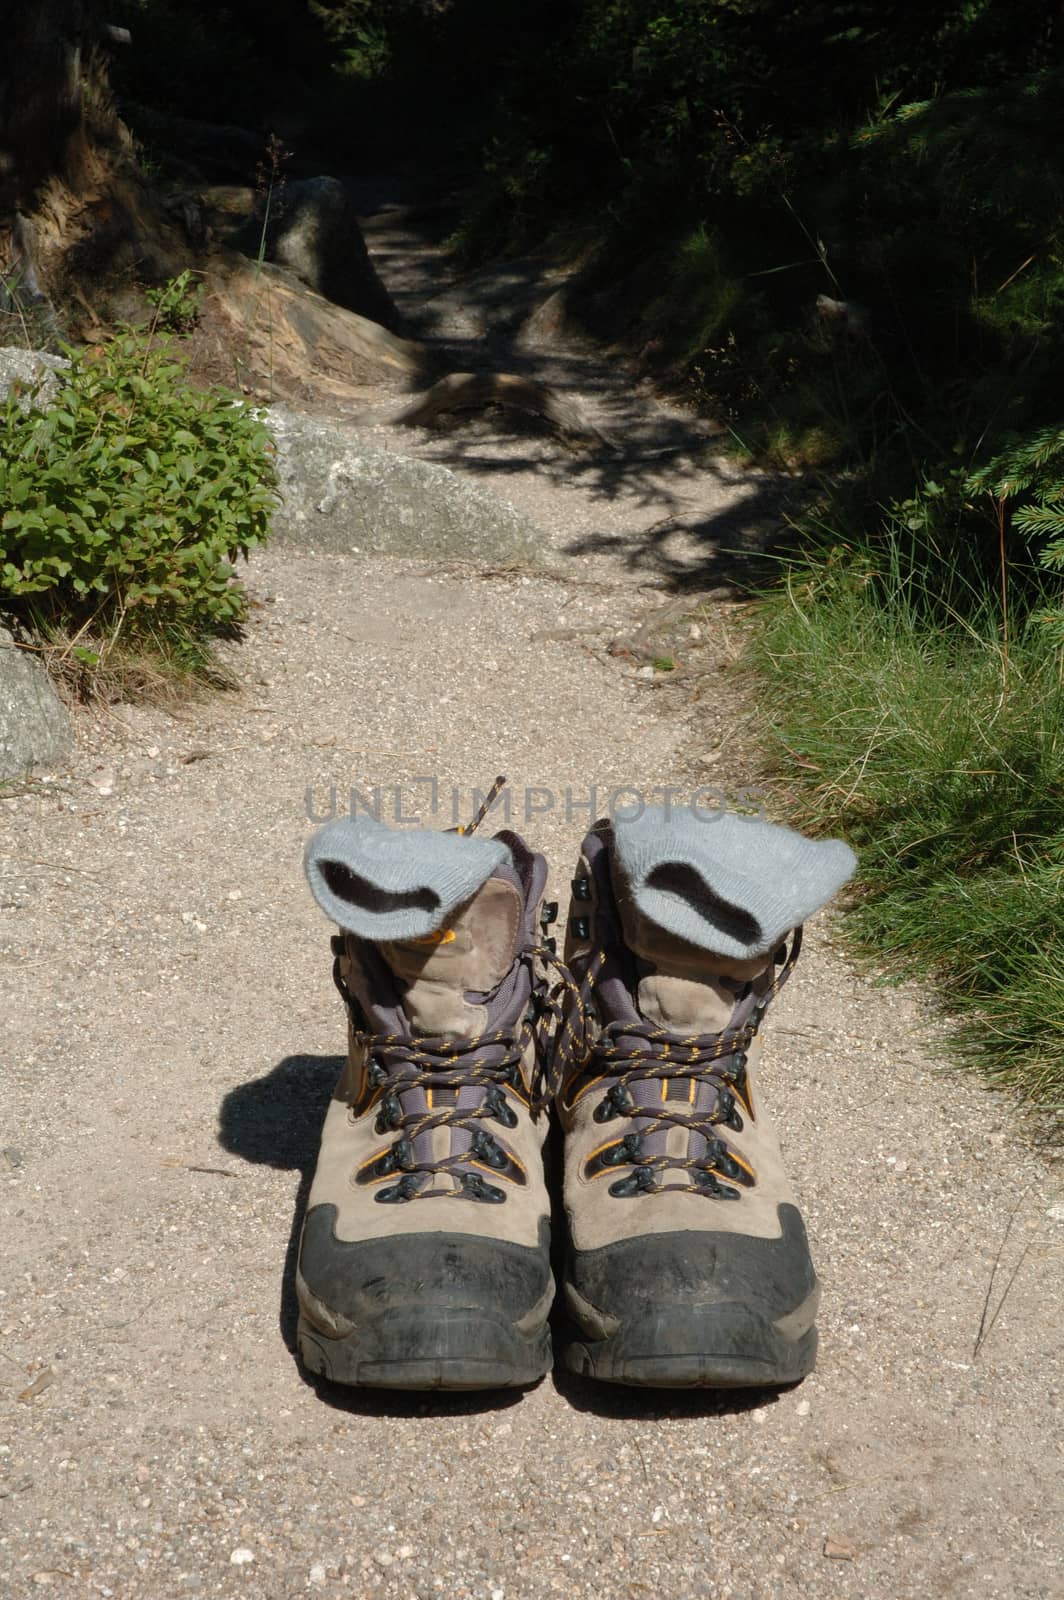 Trekking shoes on trail by janhetman